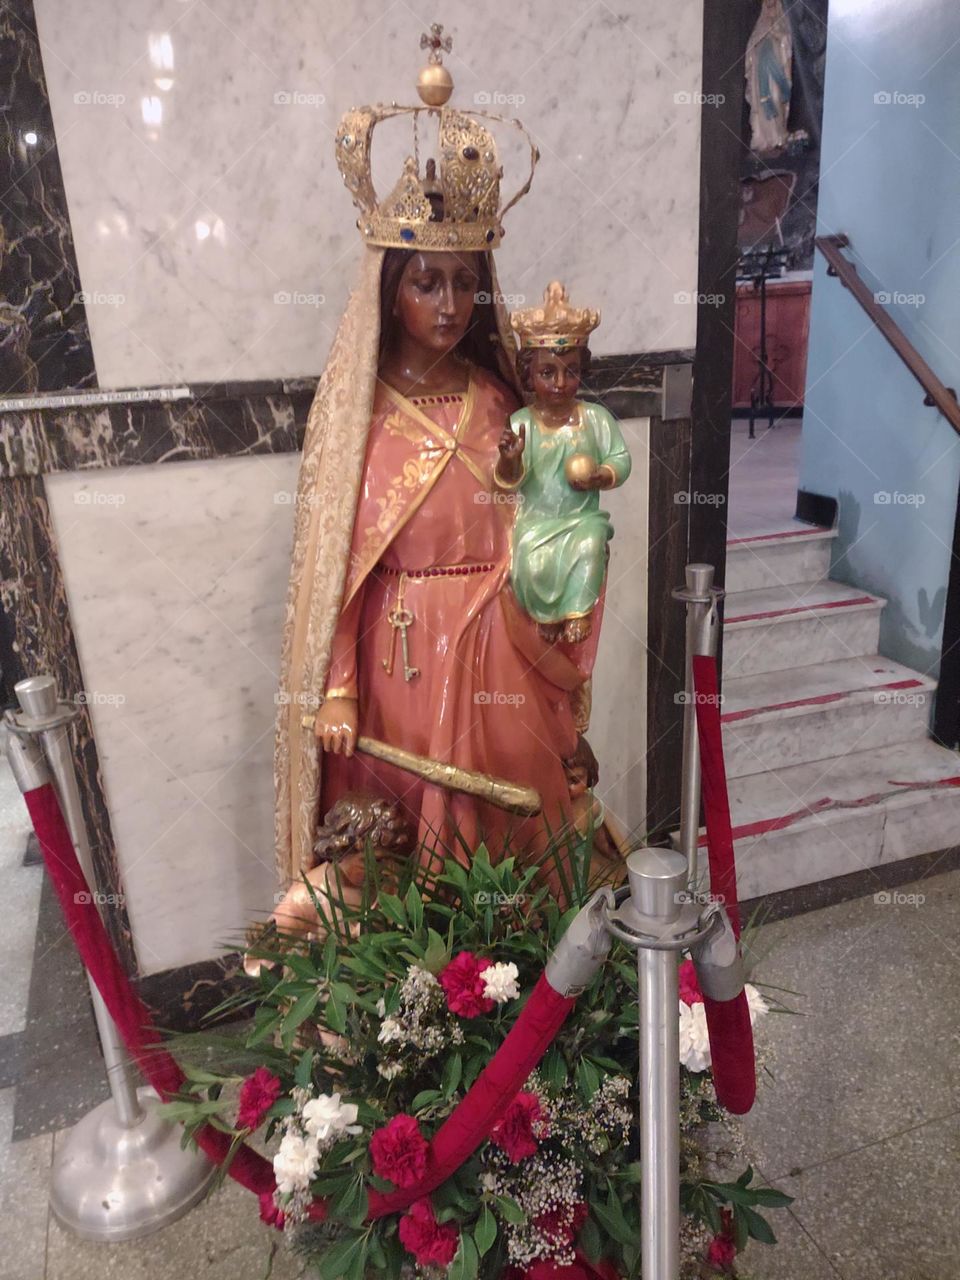 The Virgin Mary wielding a club. When some visitors saw this version of the Madonna and child statue; they said, "Ooh, she's not playin'!"